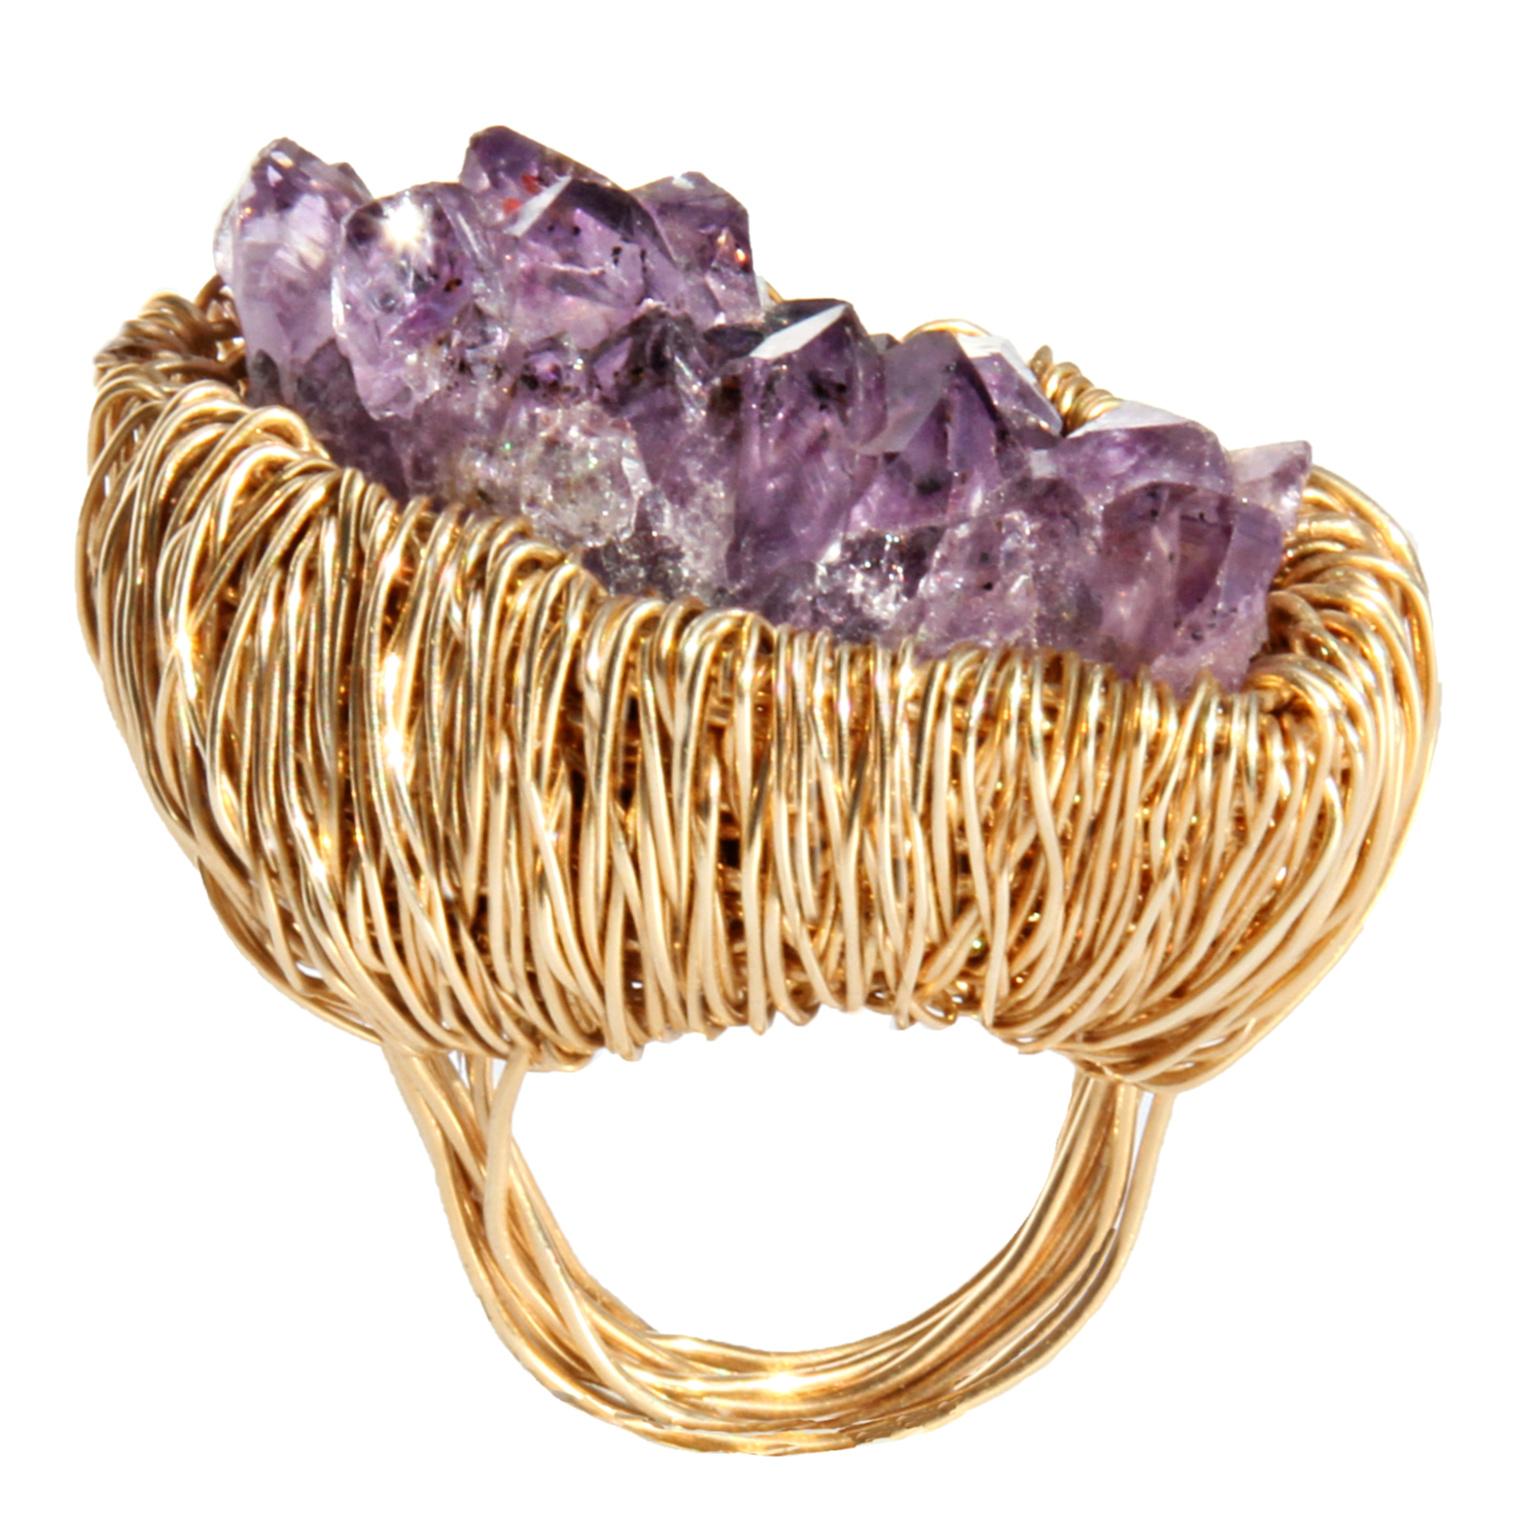 Uncut Purple Amethyst in 14 kt Gold F Statement Cocktail Ring by the artist For Sale